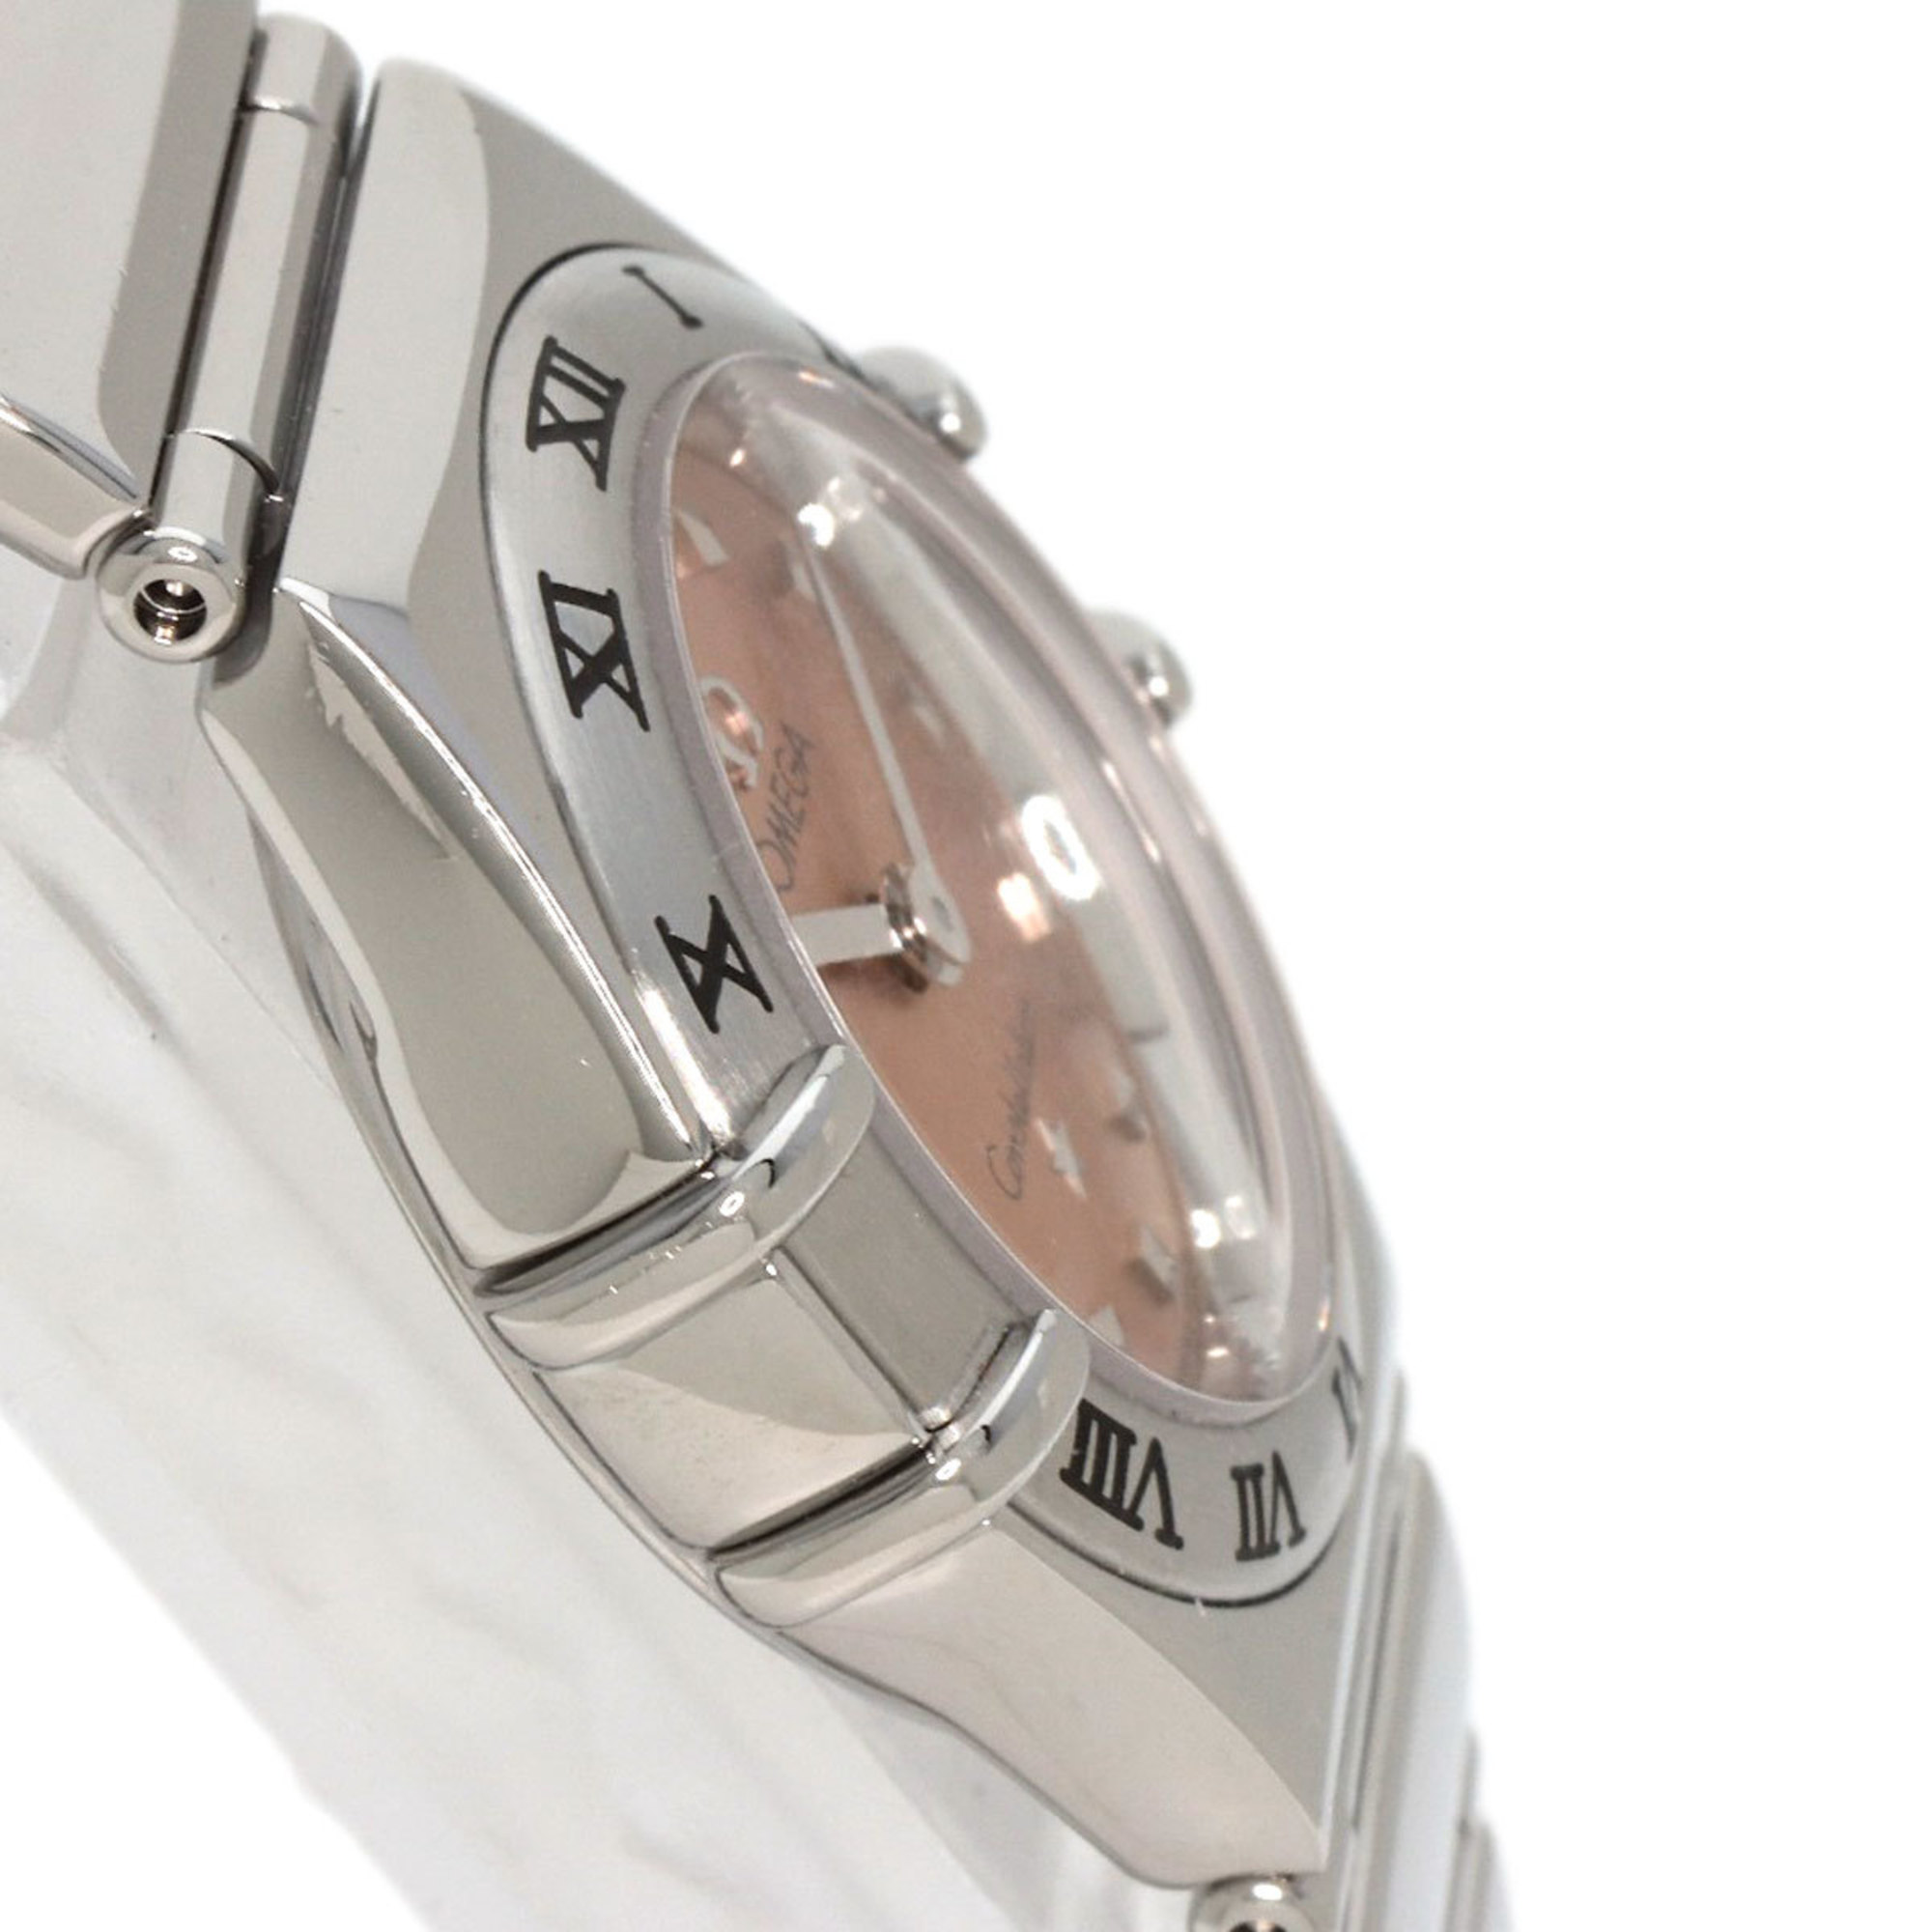 OMEGA 1561.61.0?0 Constellation Watch Stainless Steel SS Ladies